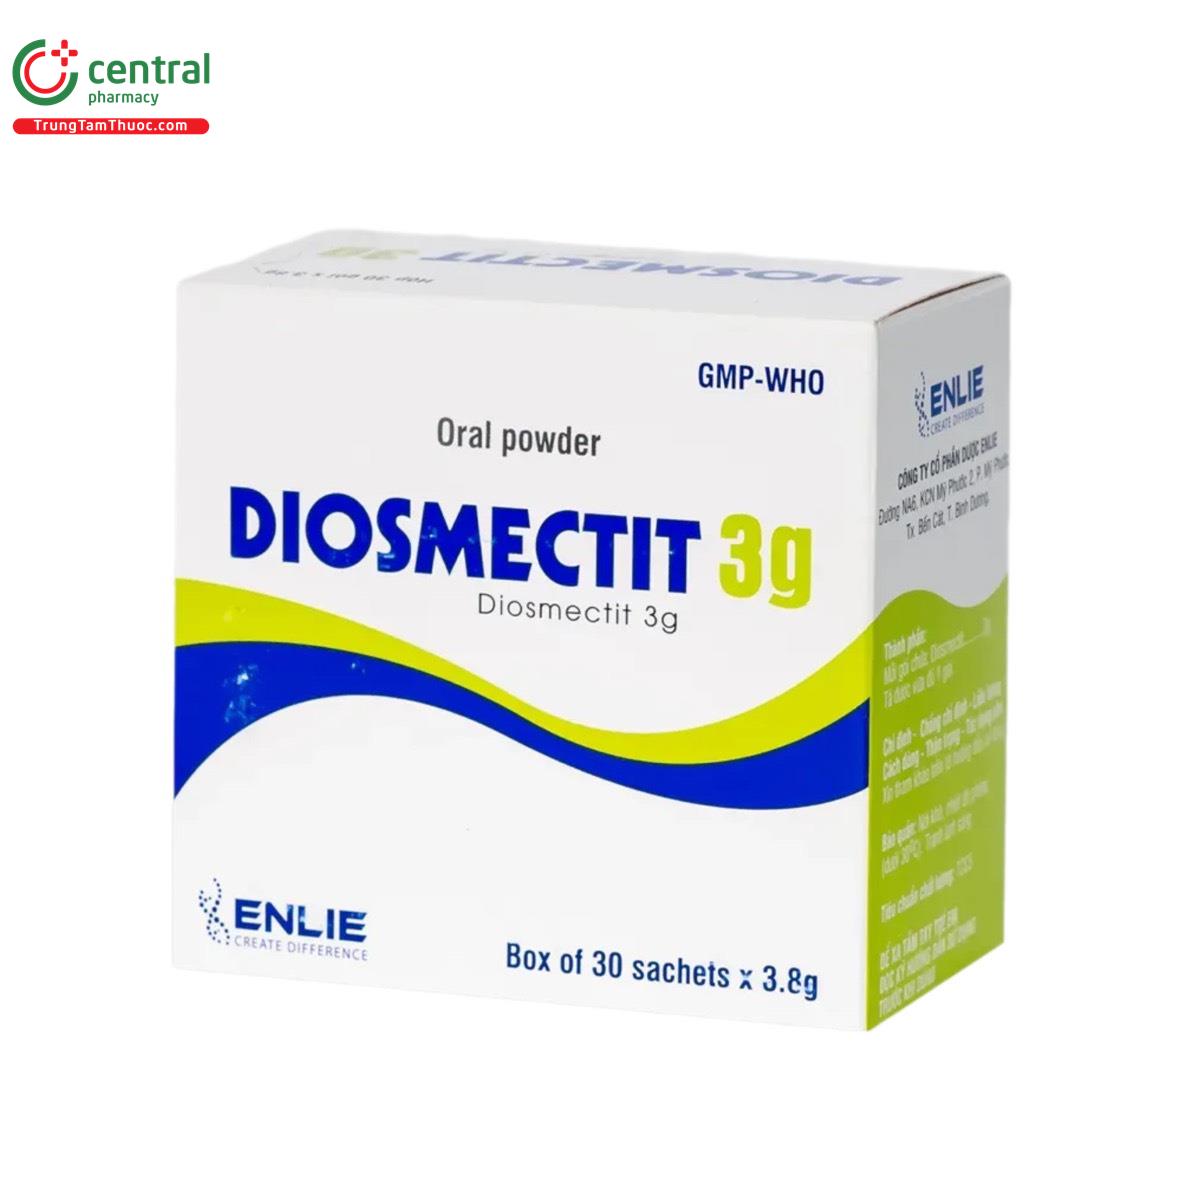 diosmectit 3g enlie 6 A0706